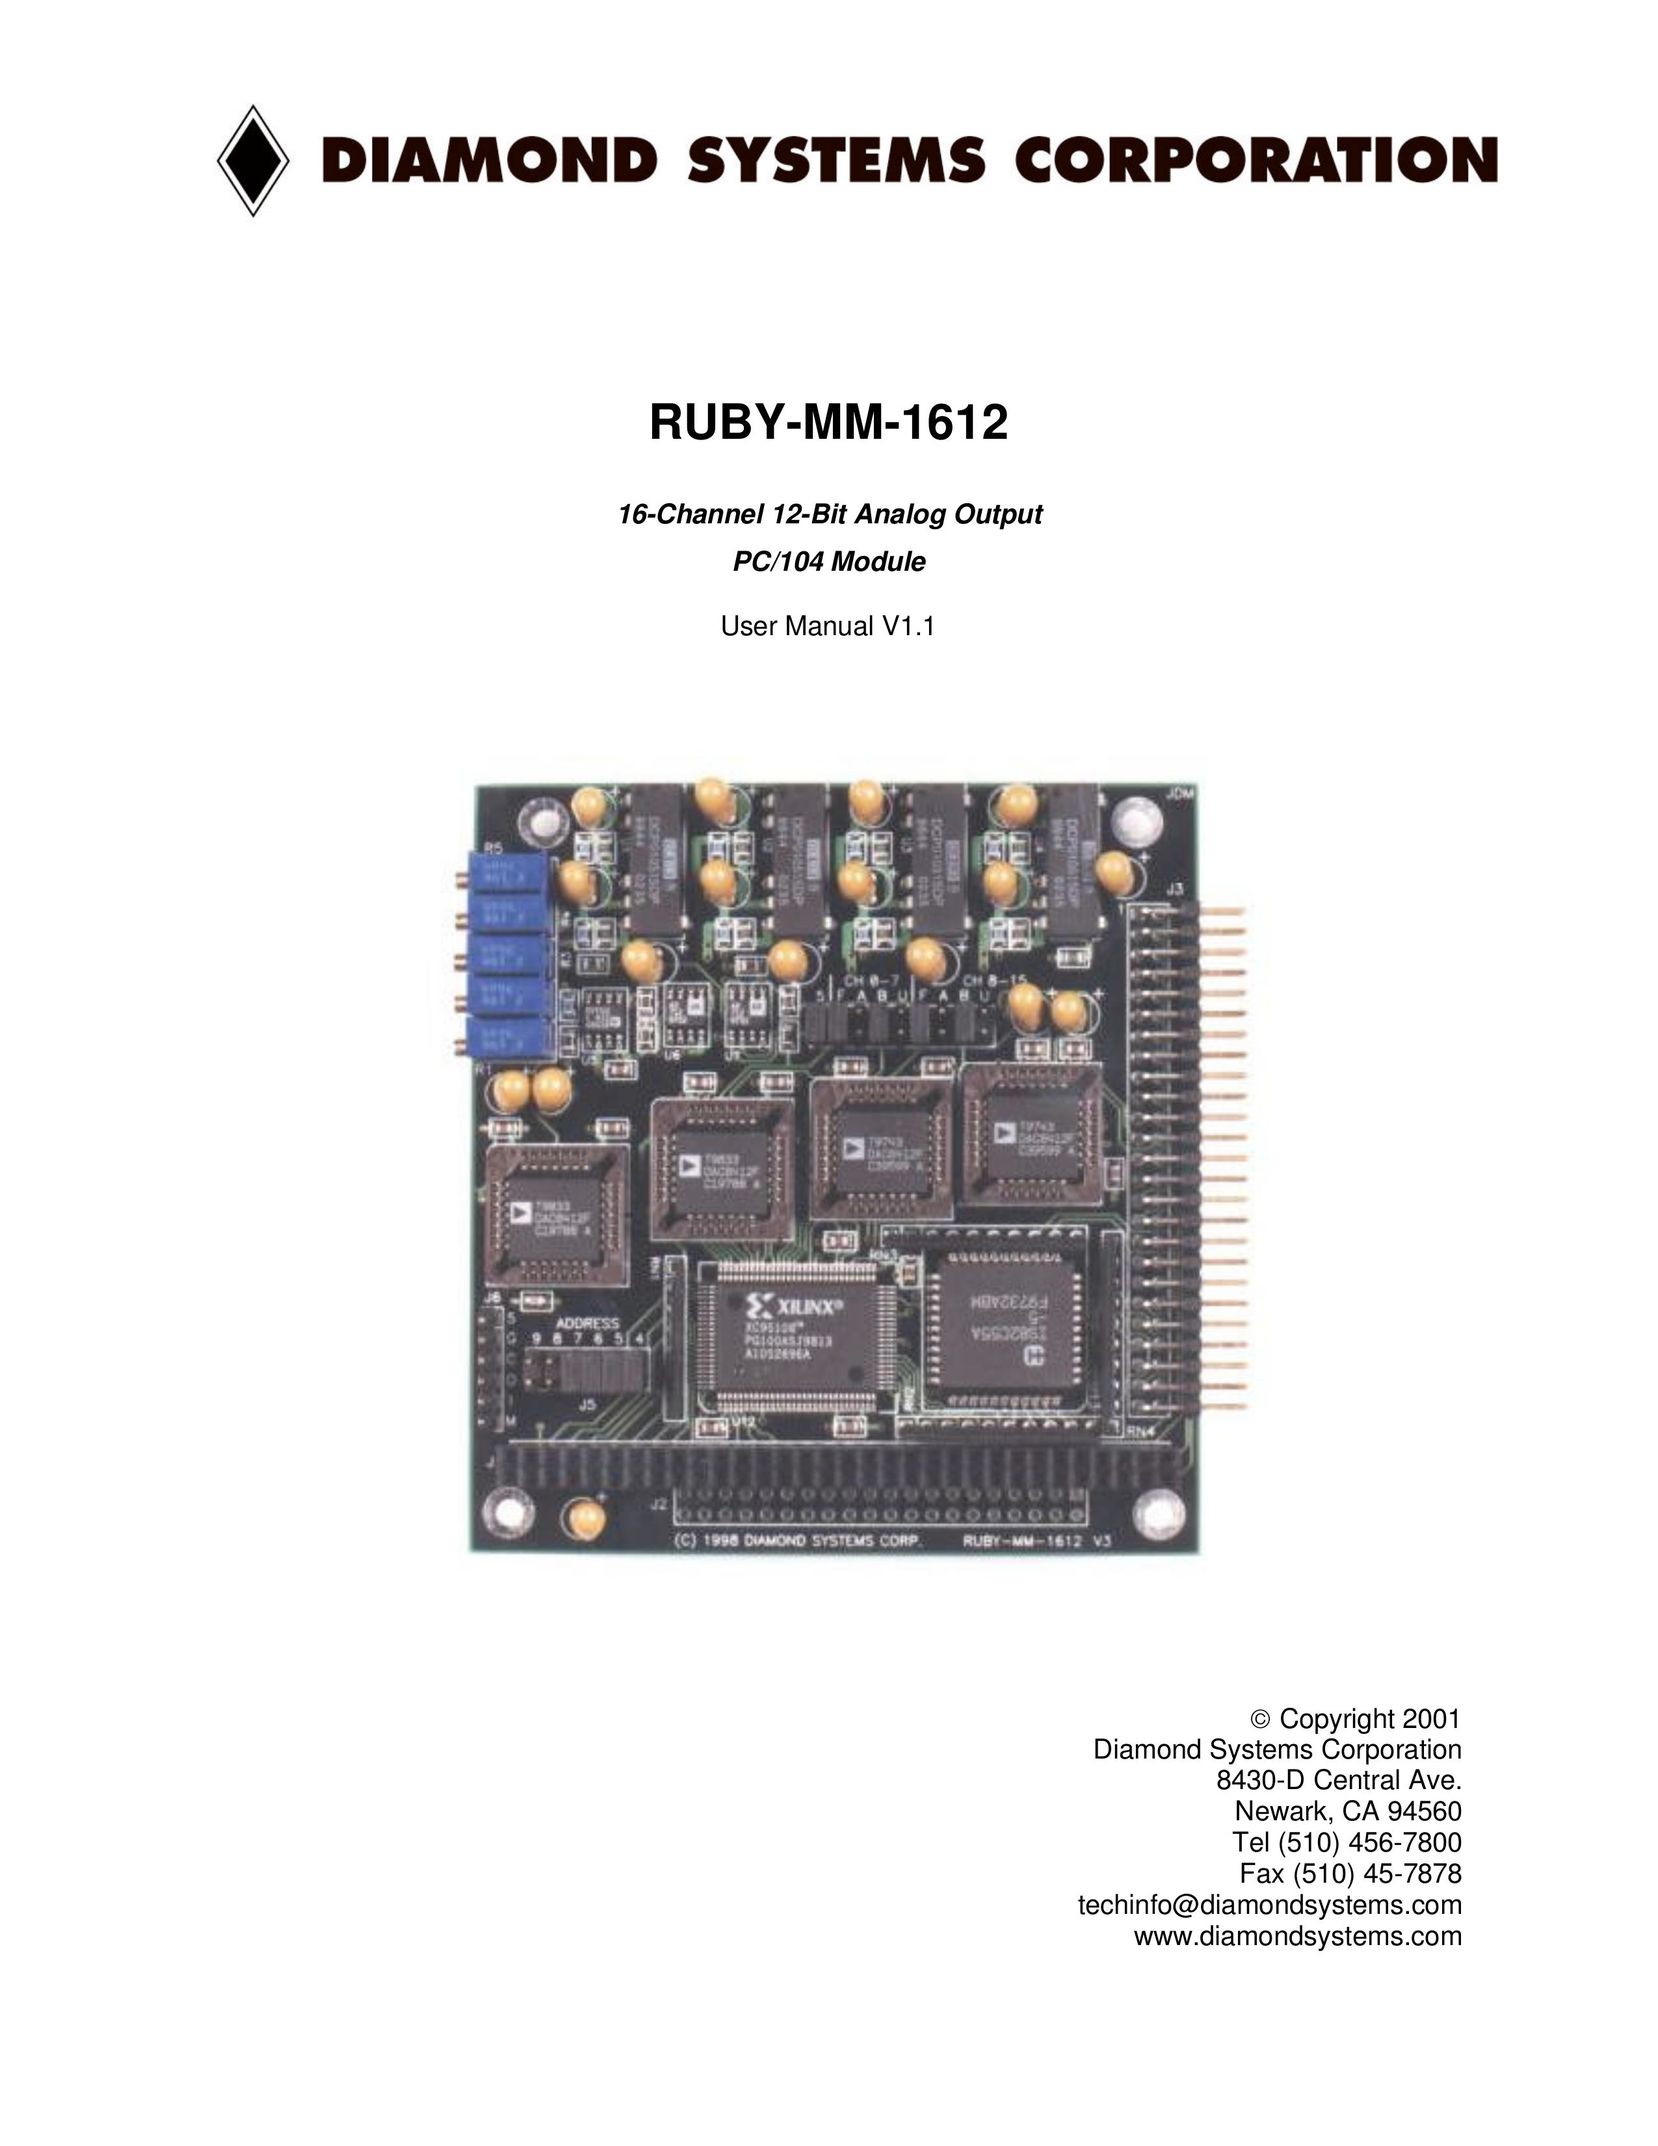 Diamond Systems 16-Channel 12-Bit Analog Output PC/104 Module Computer Hardware User Manual